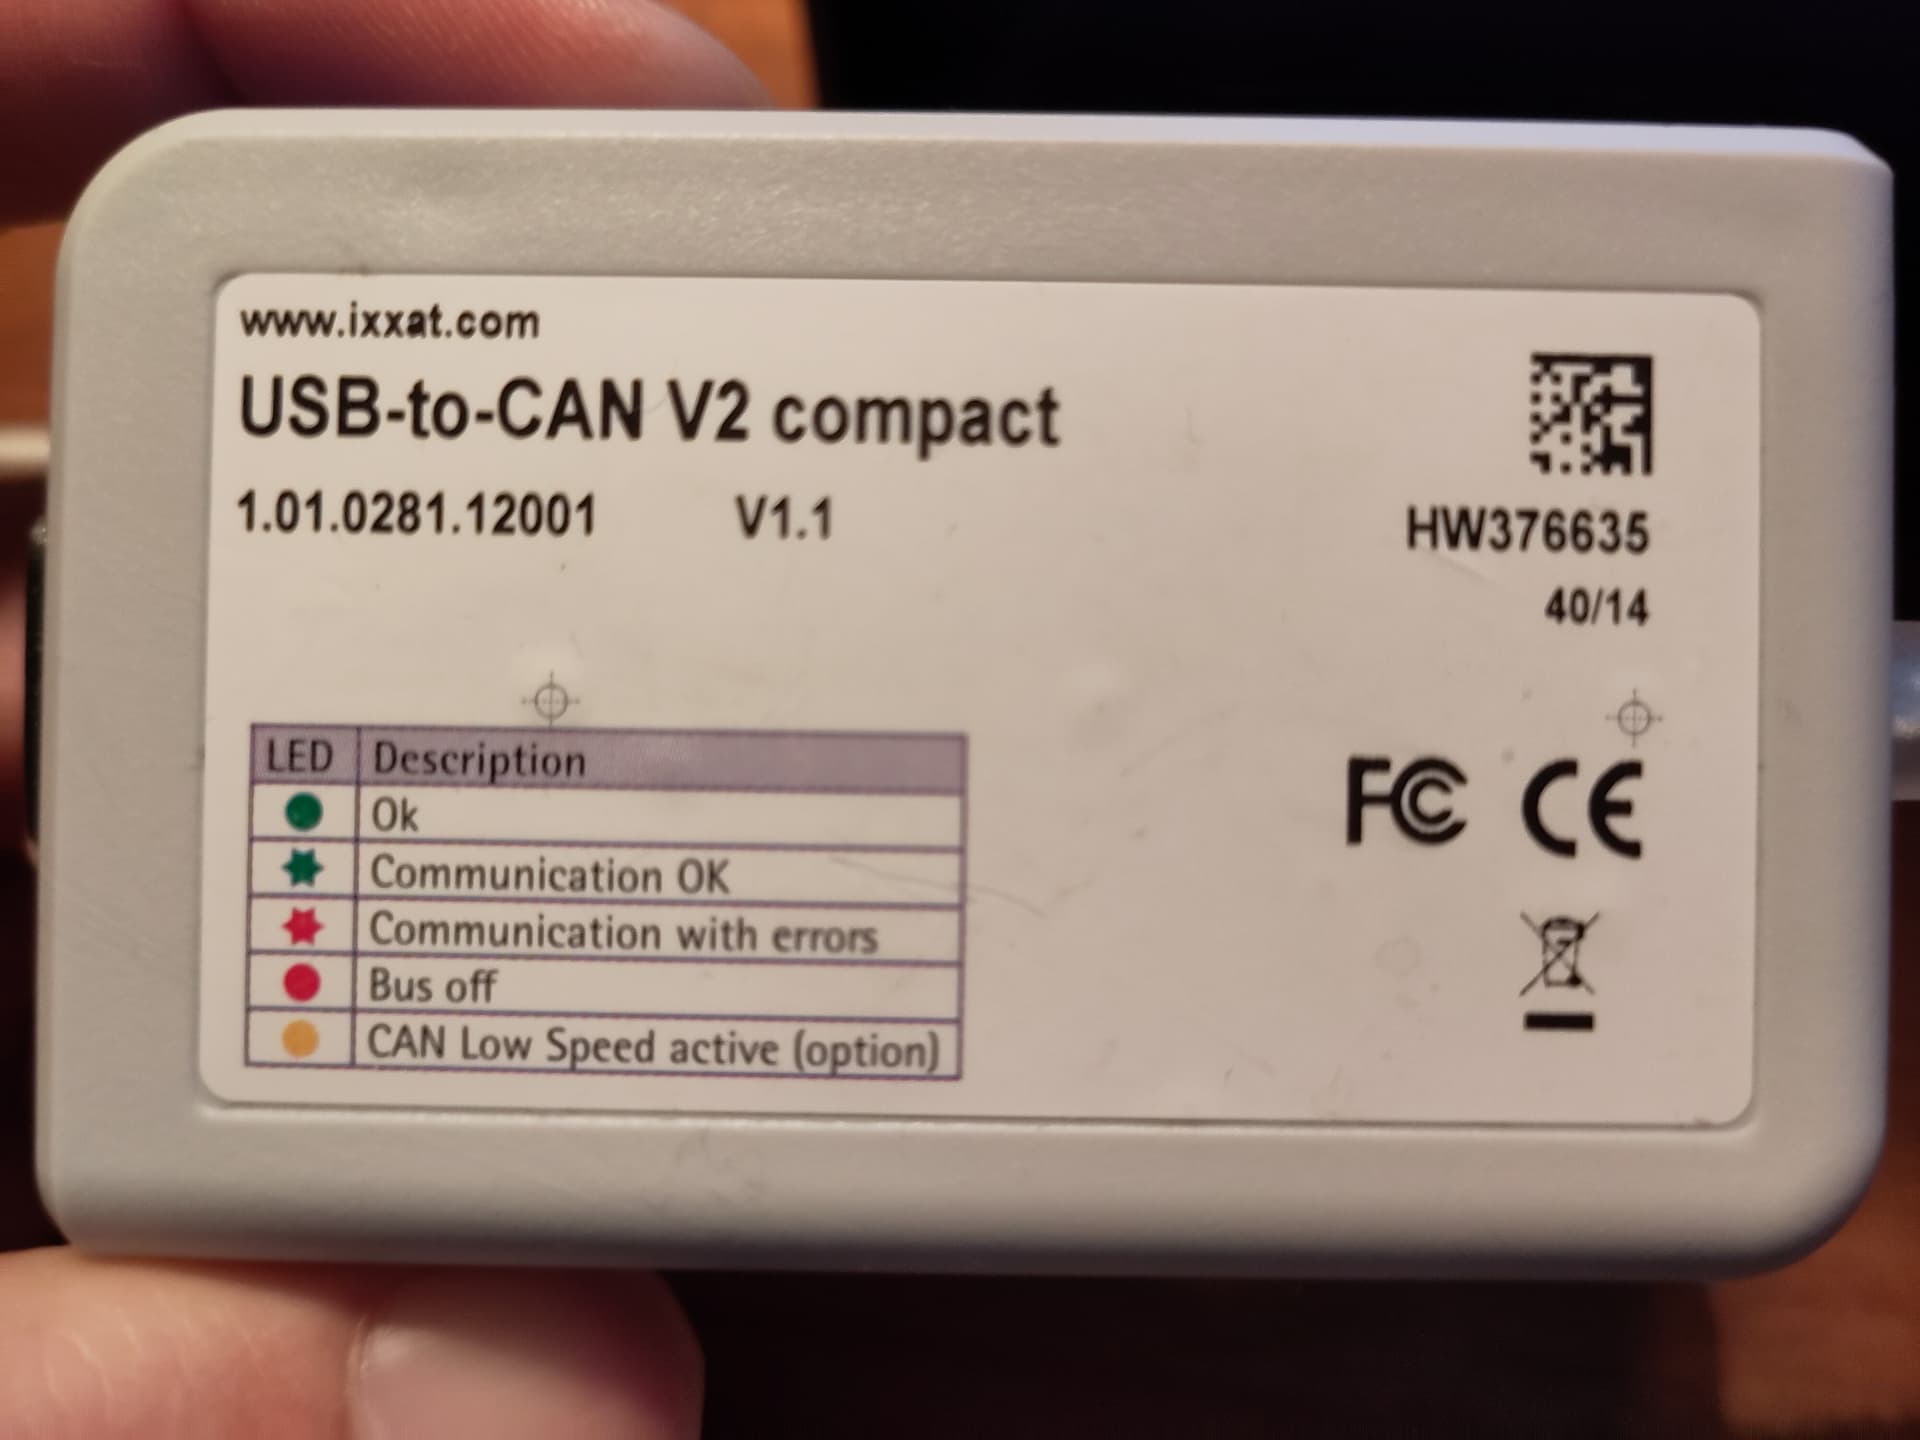 USB-to-CAN compact v2 and port car - To CAN - hms.how